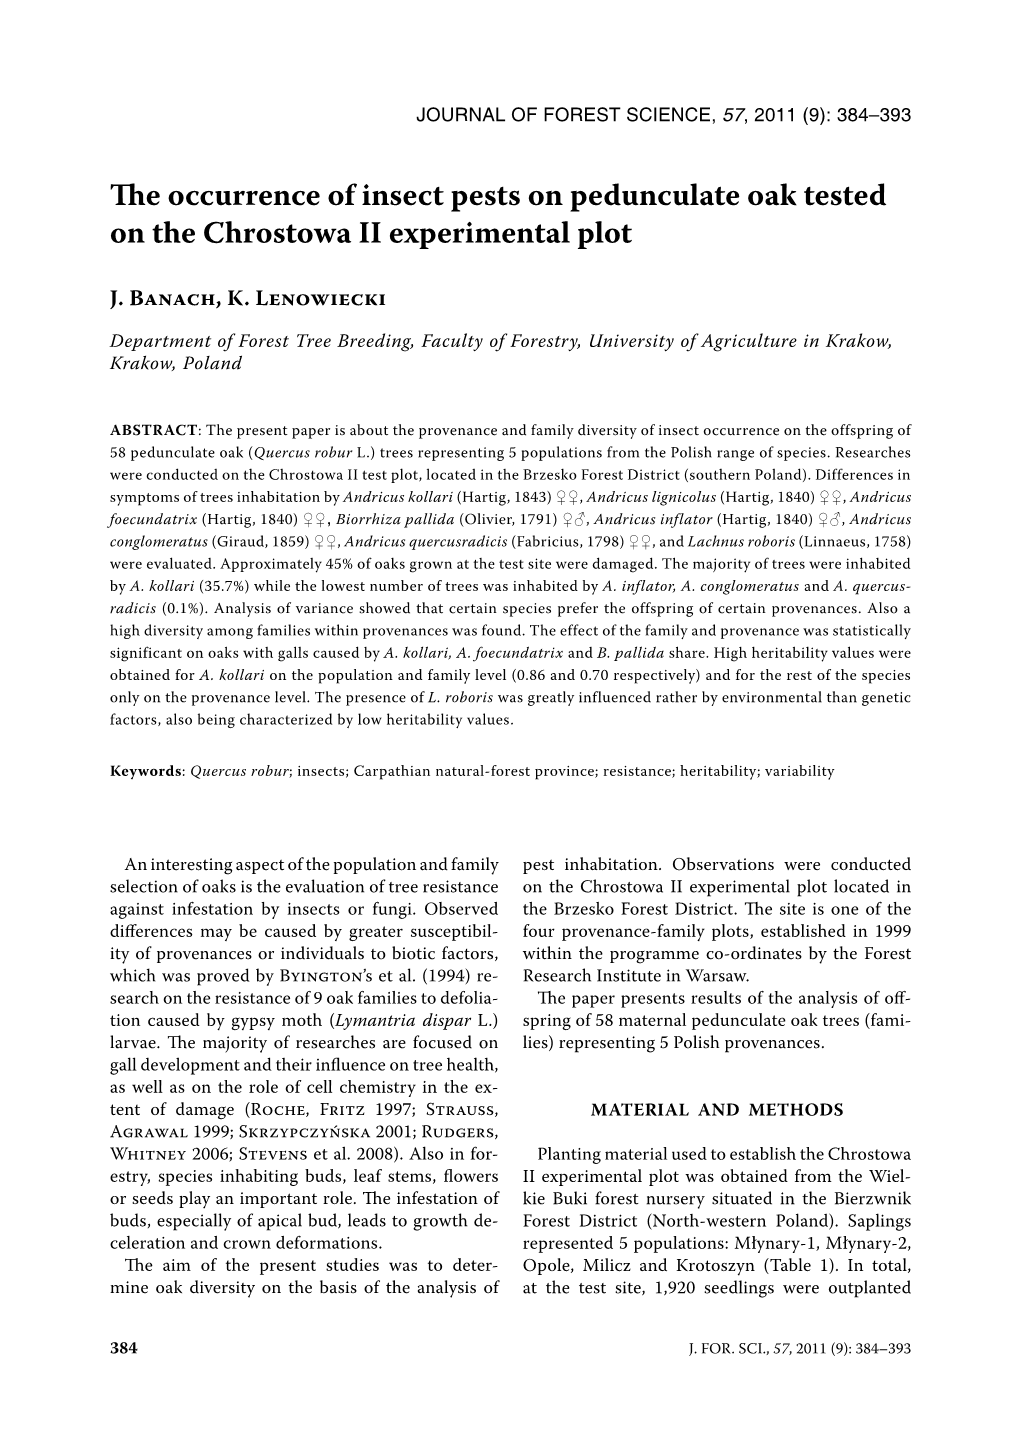 The Occurrence of Insect Pests on Pedunculate Oak Tested on the Chrostowa II Experimental Plot